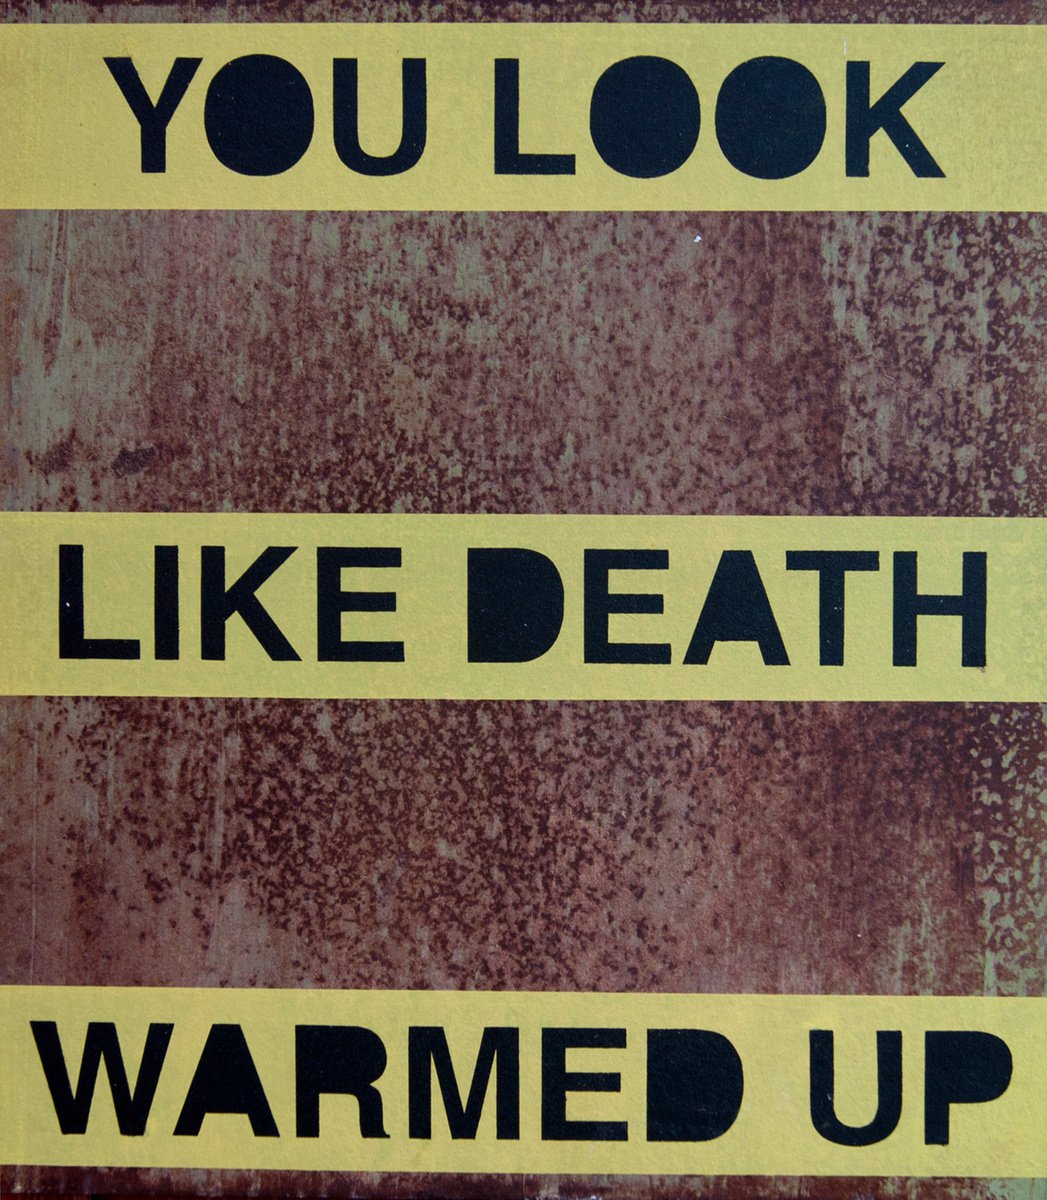 You look like death warmed up!! by Ian McKay